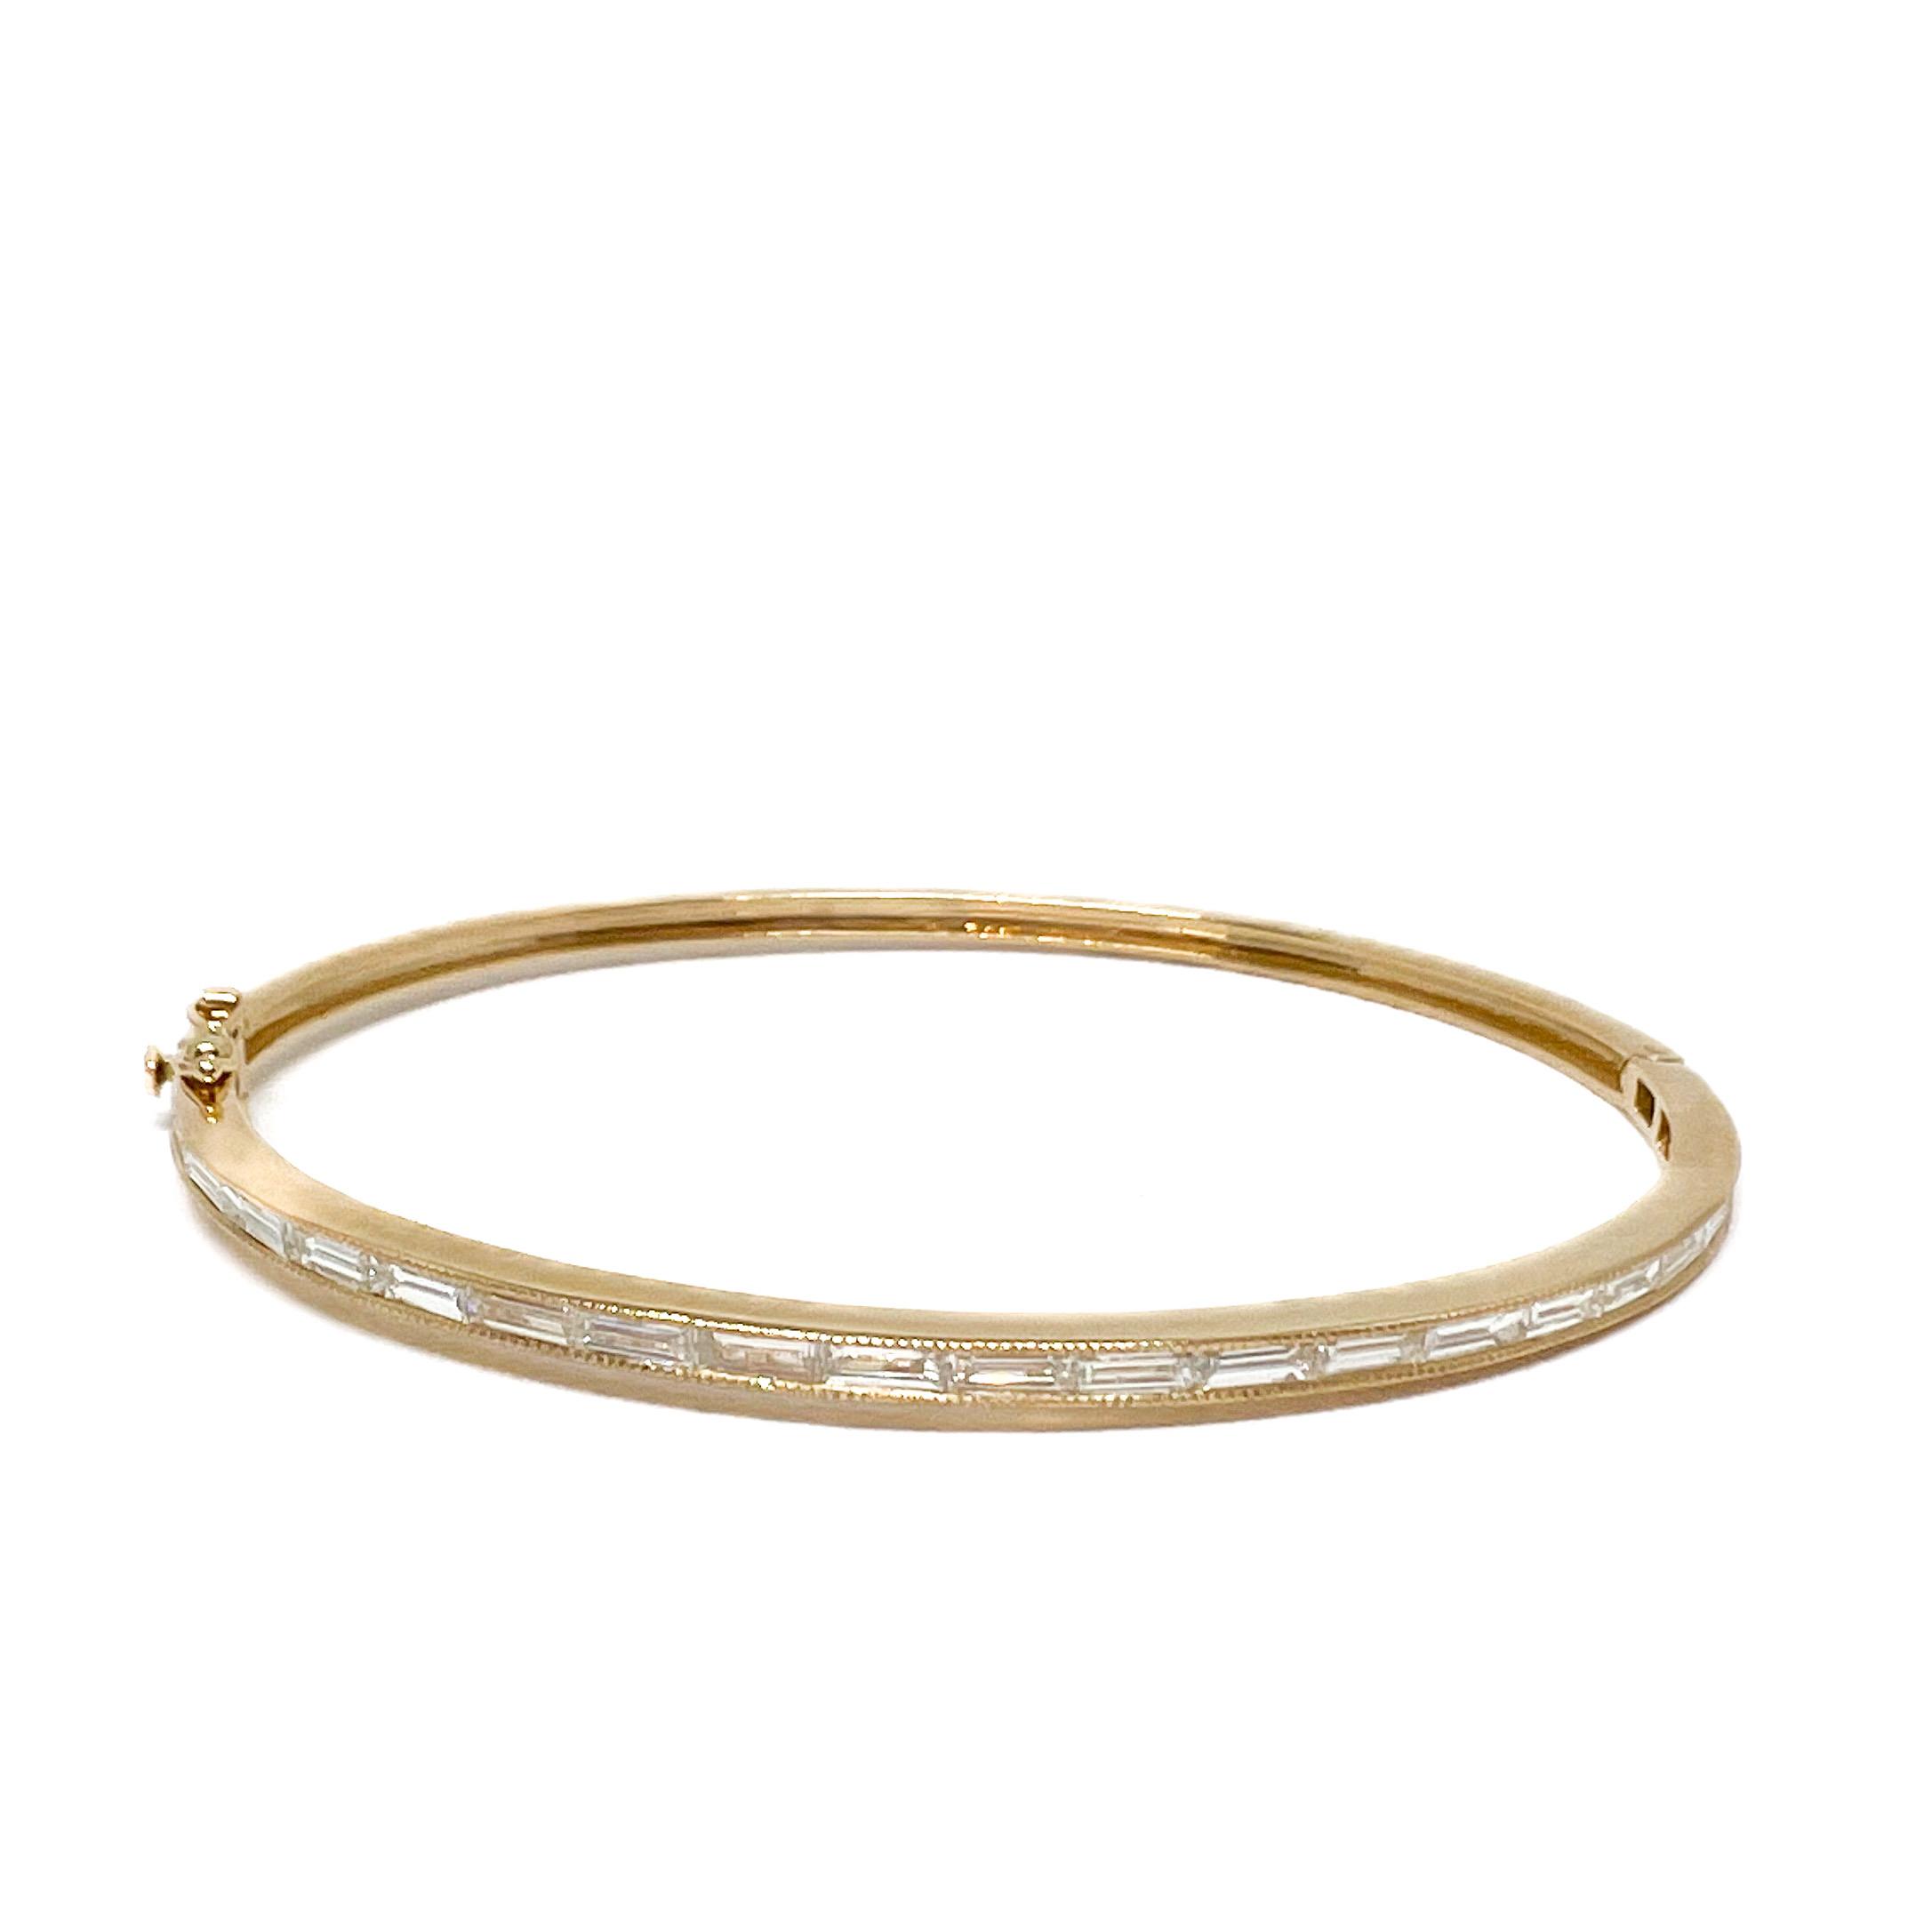 Baguette Diamond Hinged Oval Bangle | Von Bargen's Jewelry